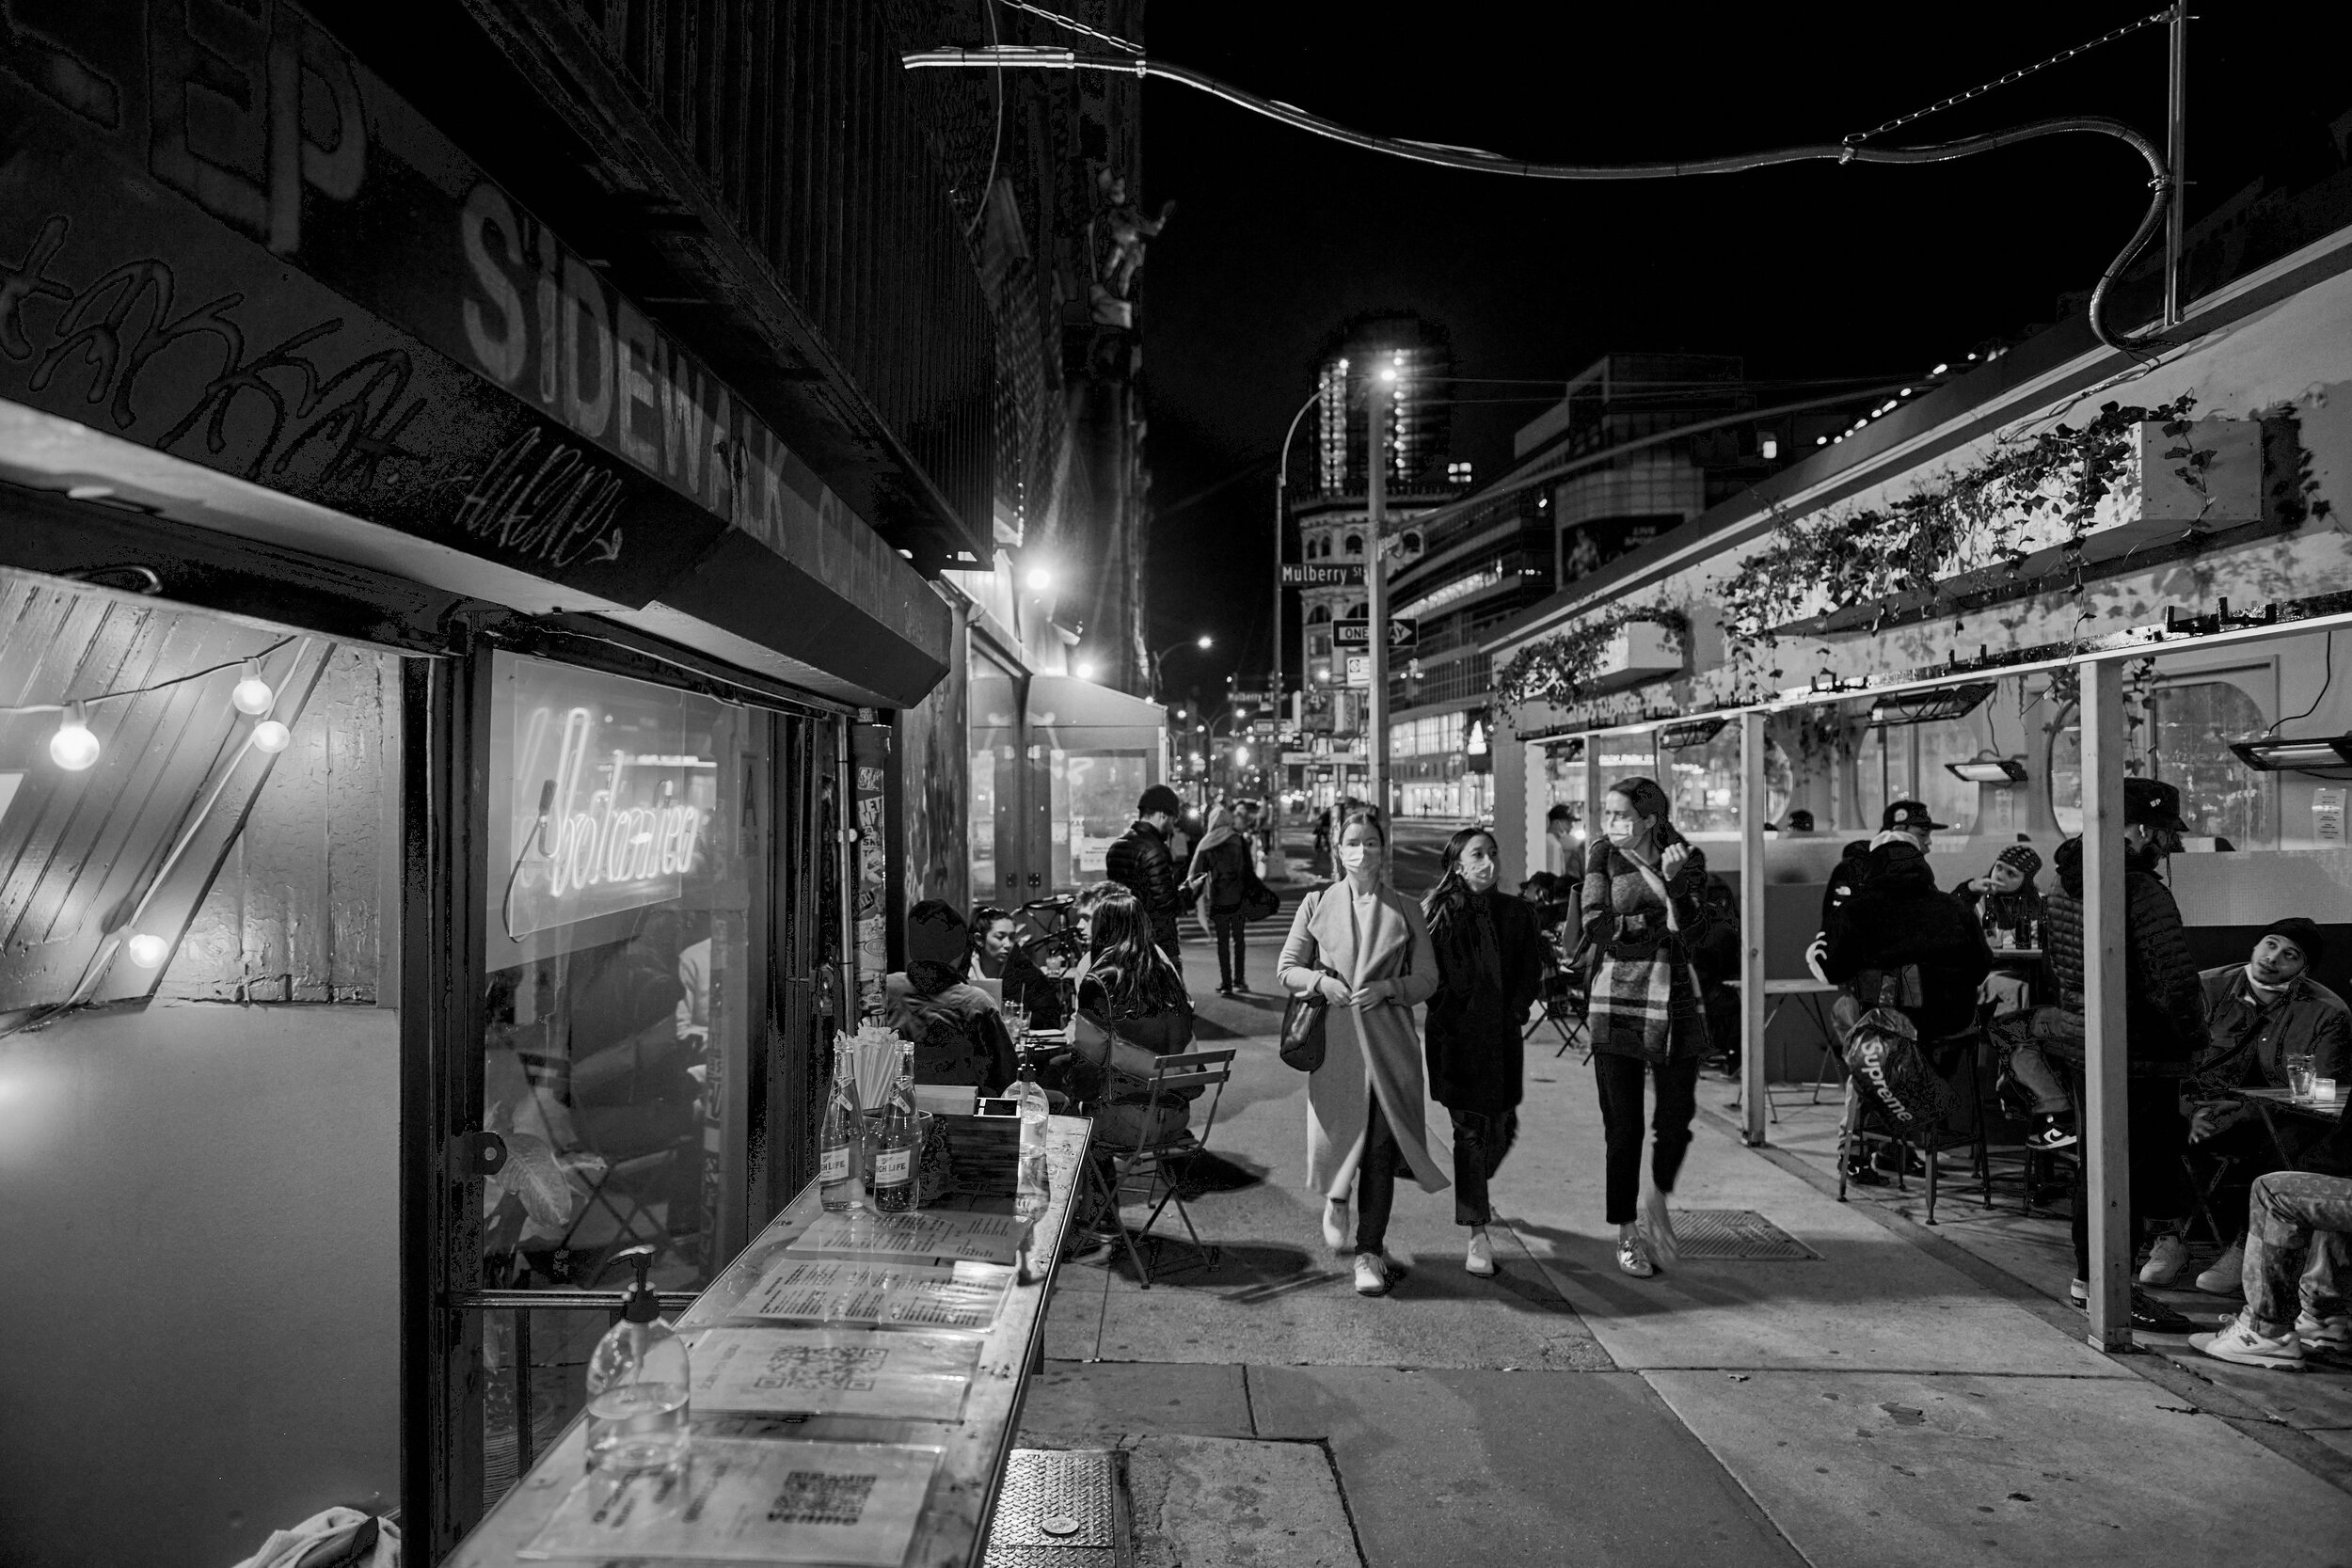 Black and white photo of outdoor seating area and sidewalk seating at night